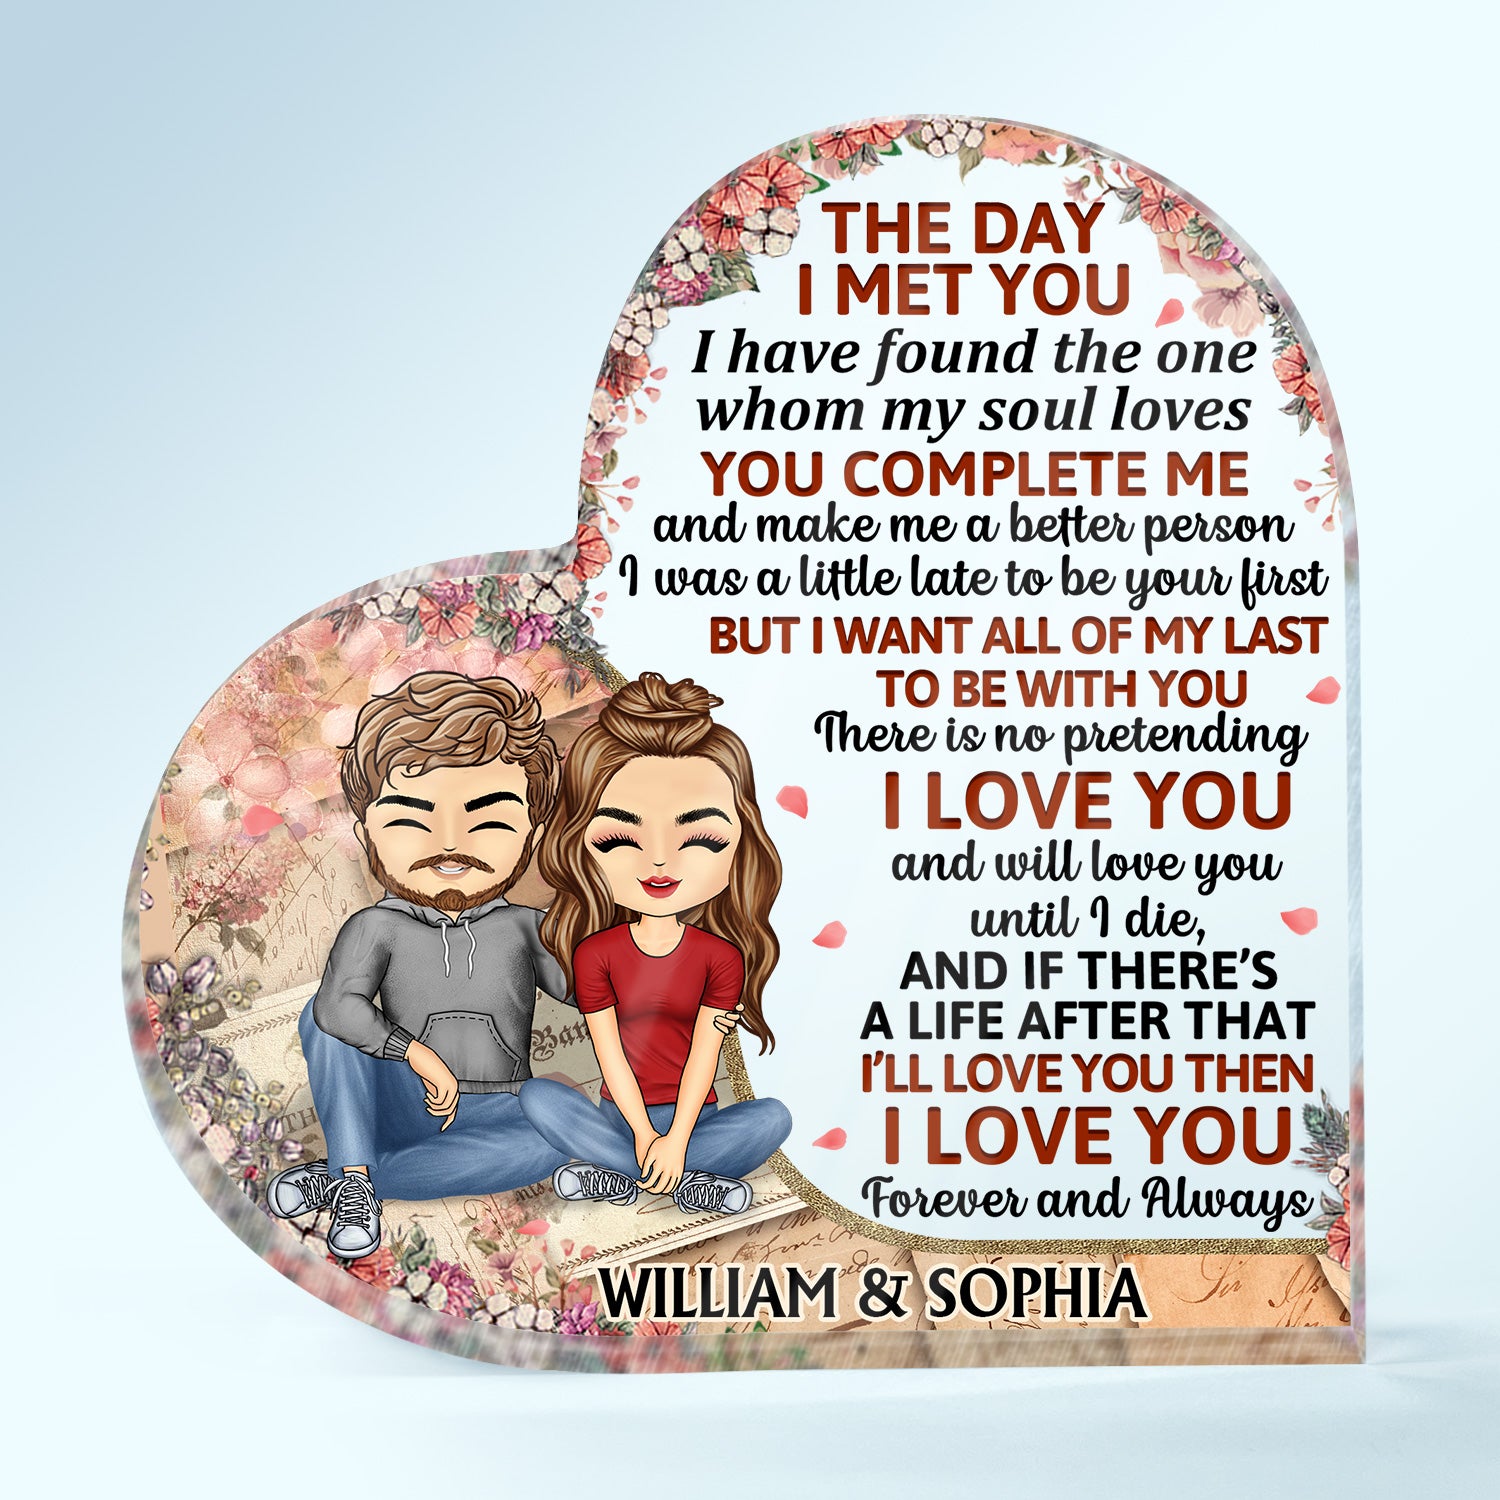 The Day I Met You Husband Wife Couples - Home Decor, Anniversary, Birthday Gift For Spouse, Husband, Wife, Boyfriend, Girlfriend - Personalized Custom Heart Shaped Acrylic Plaque